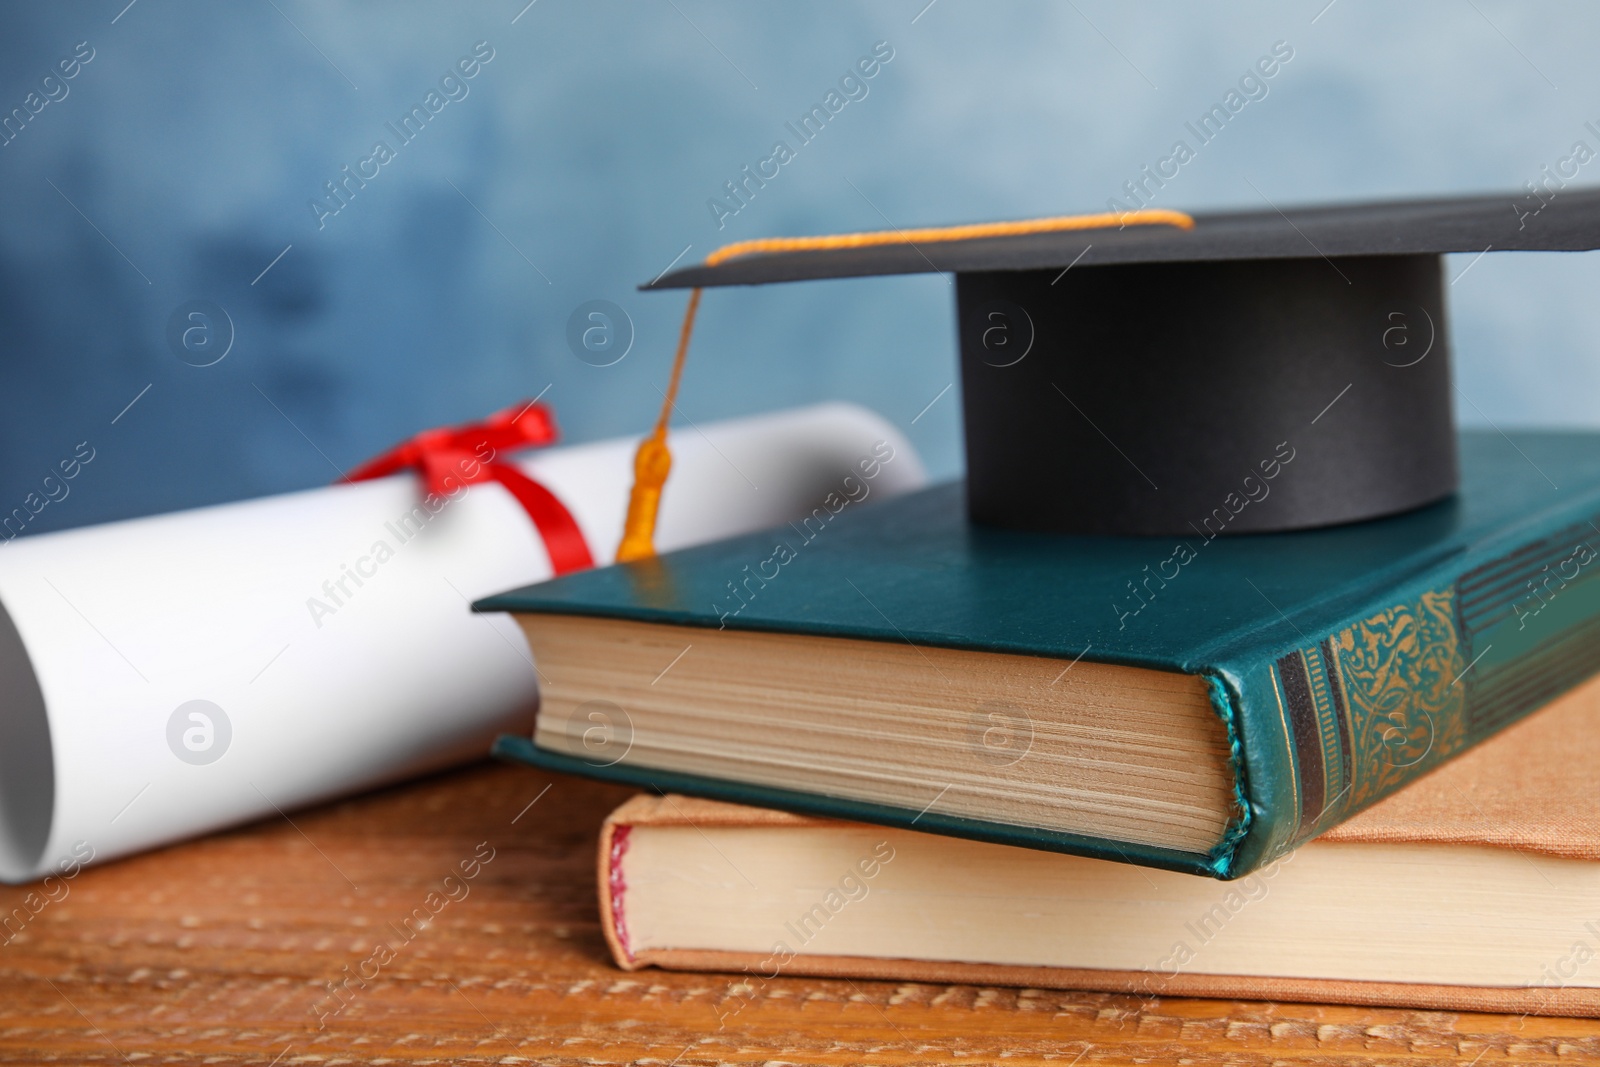 Photo of Graduation hat, books and student's diploma on wooden table against light blue background, closeup